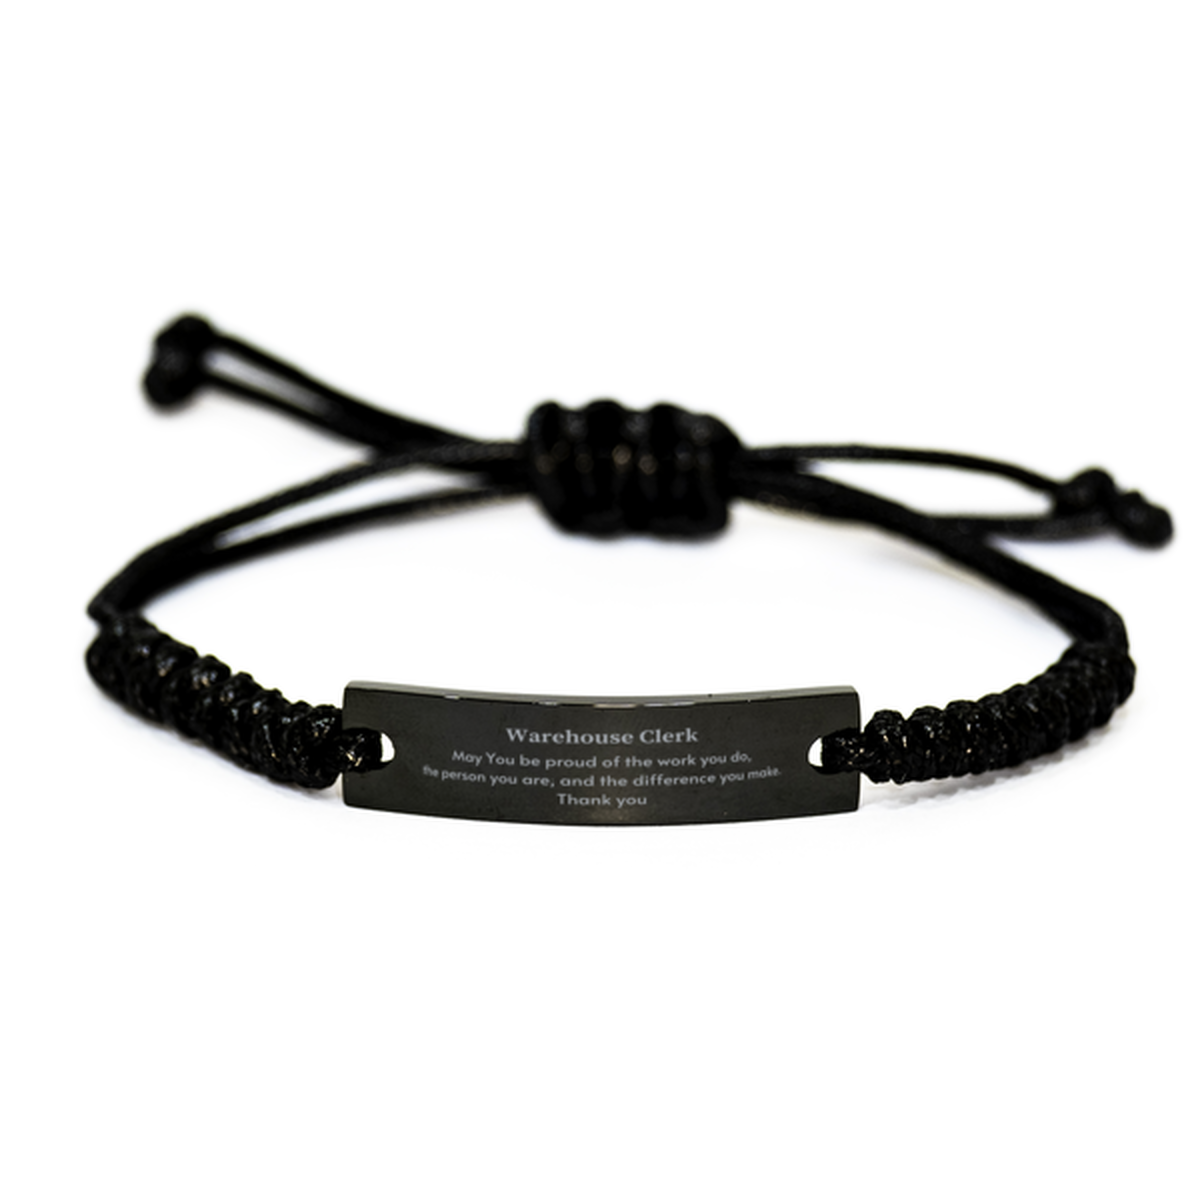 Heartwarming Black Rope Bracelet Retirement Coworkers Gifts for Warehouse Clerk, Warehouse Clerk May You be proud of the work you do, the person you are Gifts for Boss Men Women Friends